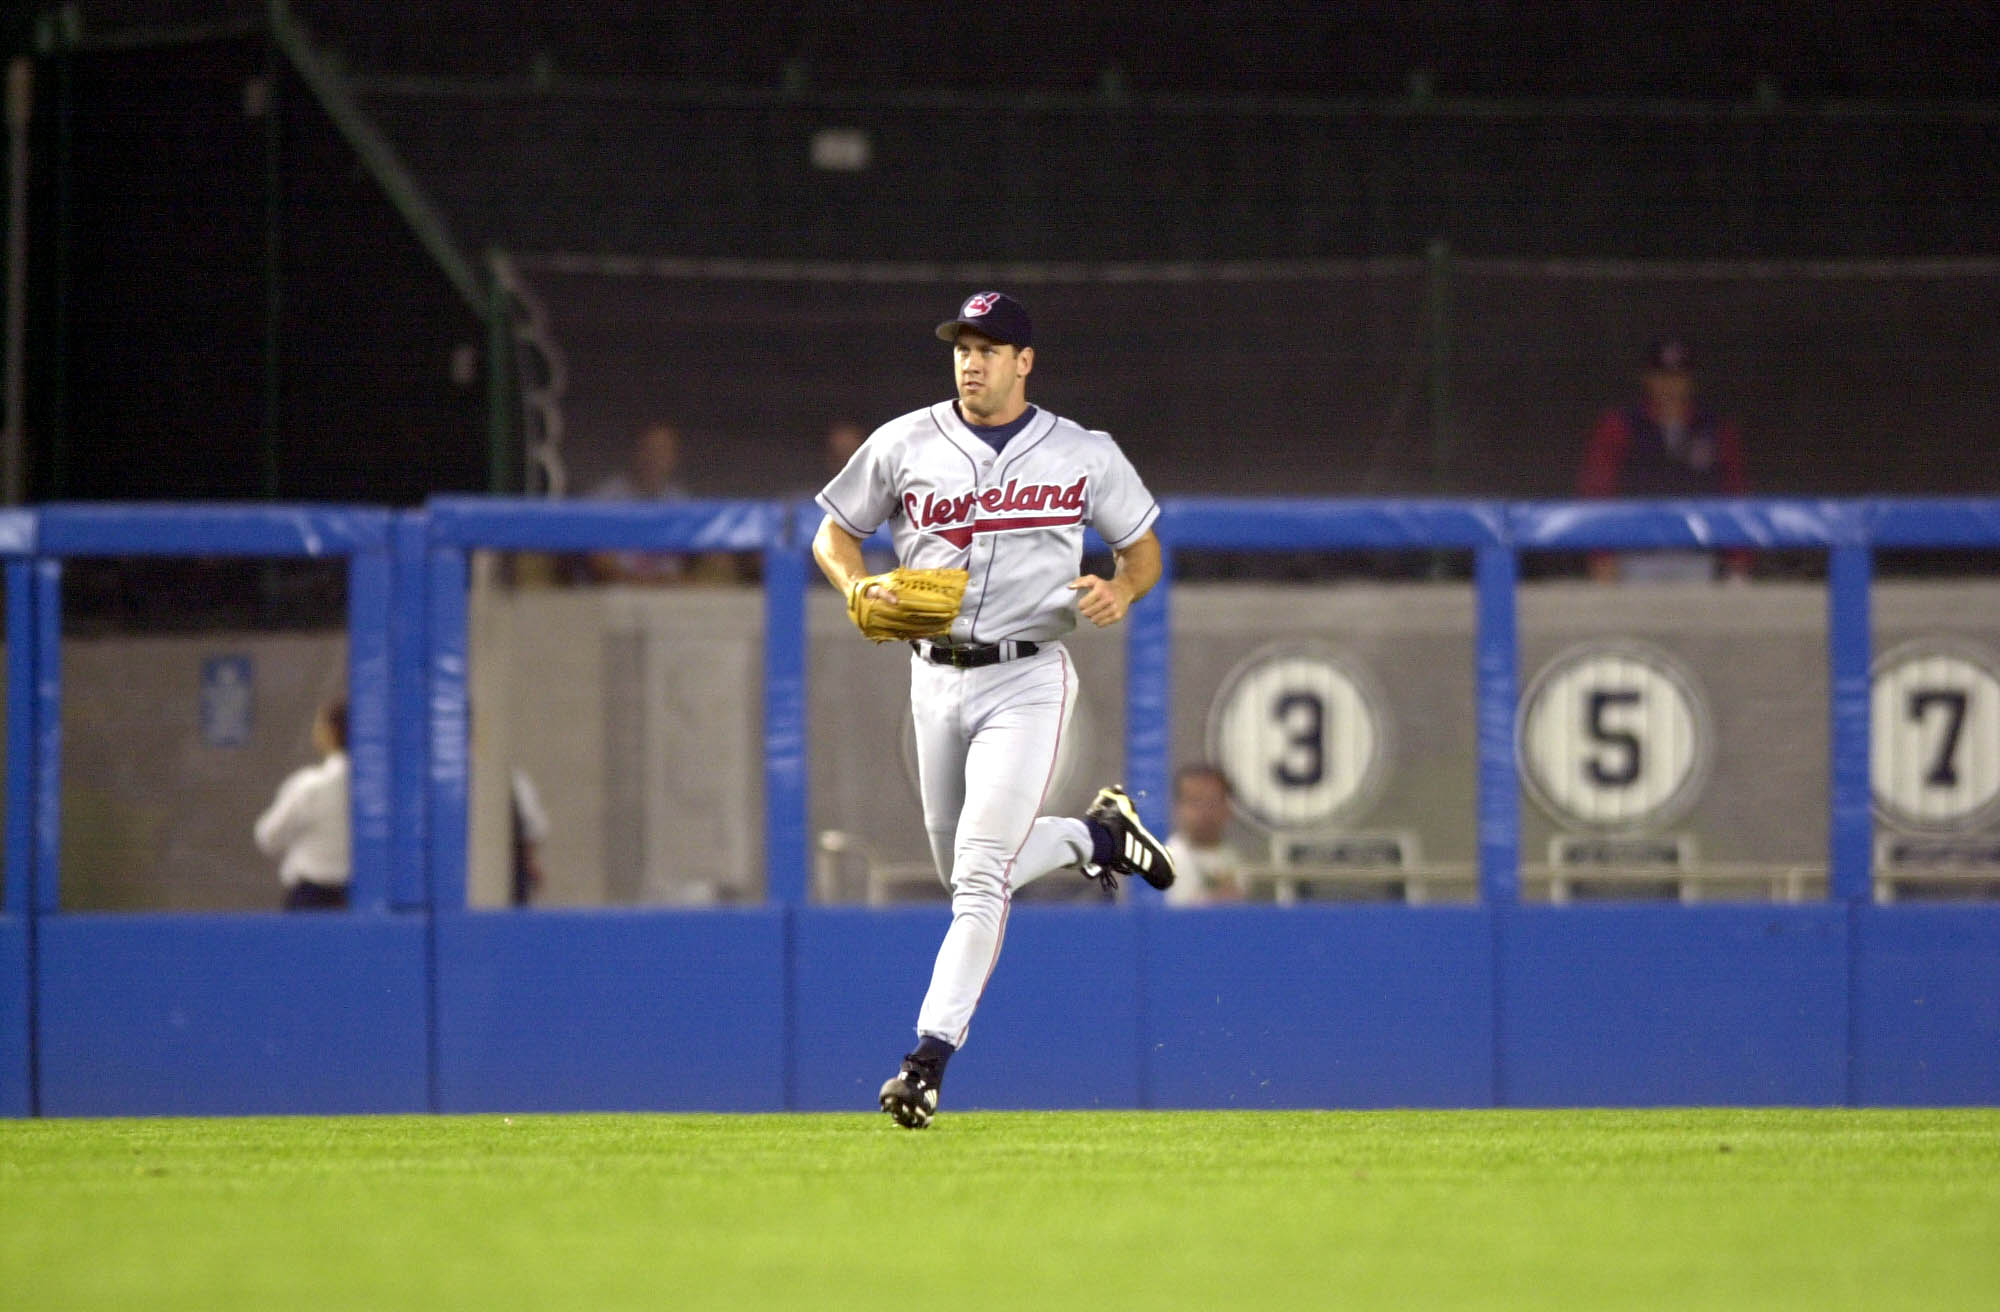 Tigers' Omar Vizquel happy to see Cleveland win a championship